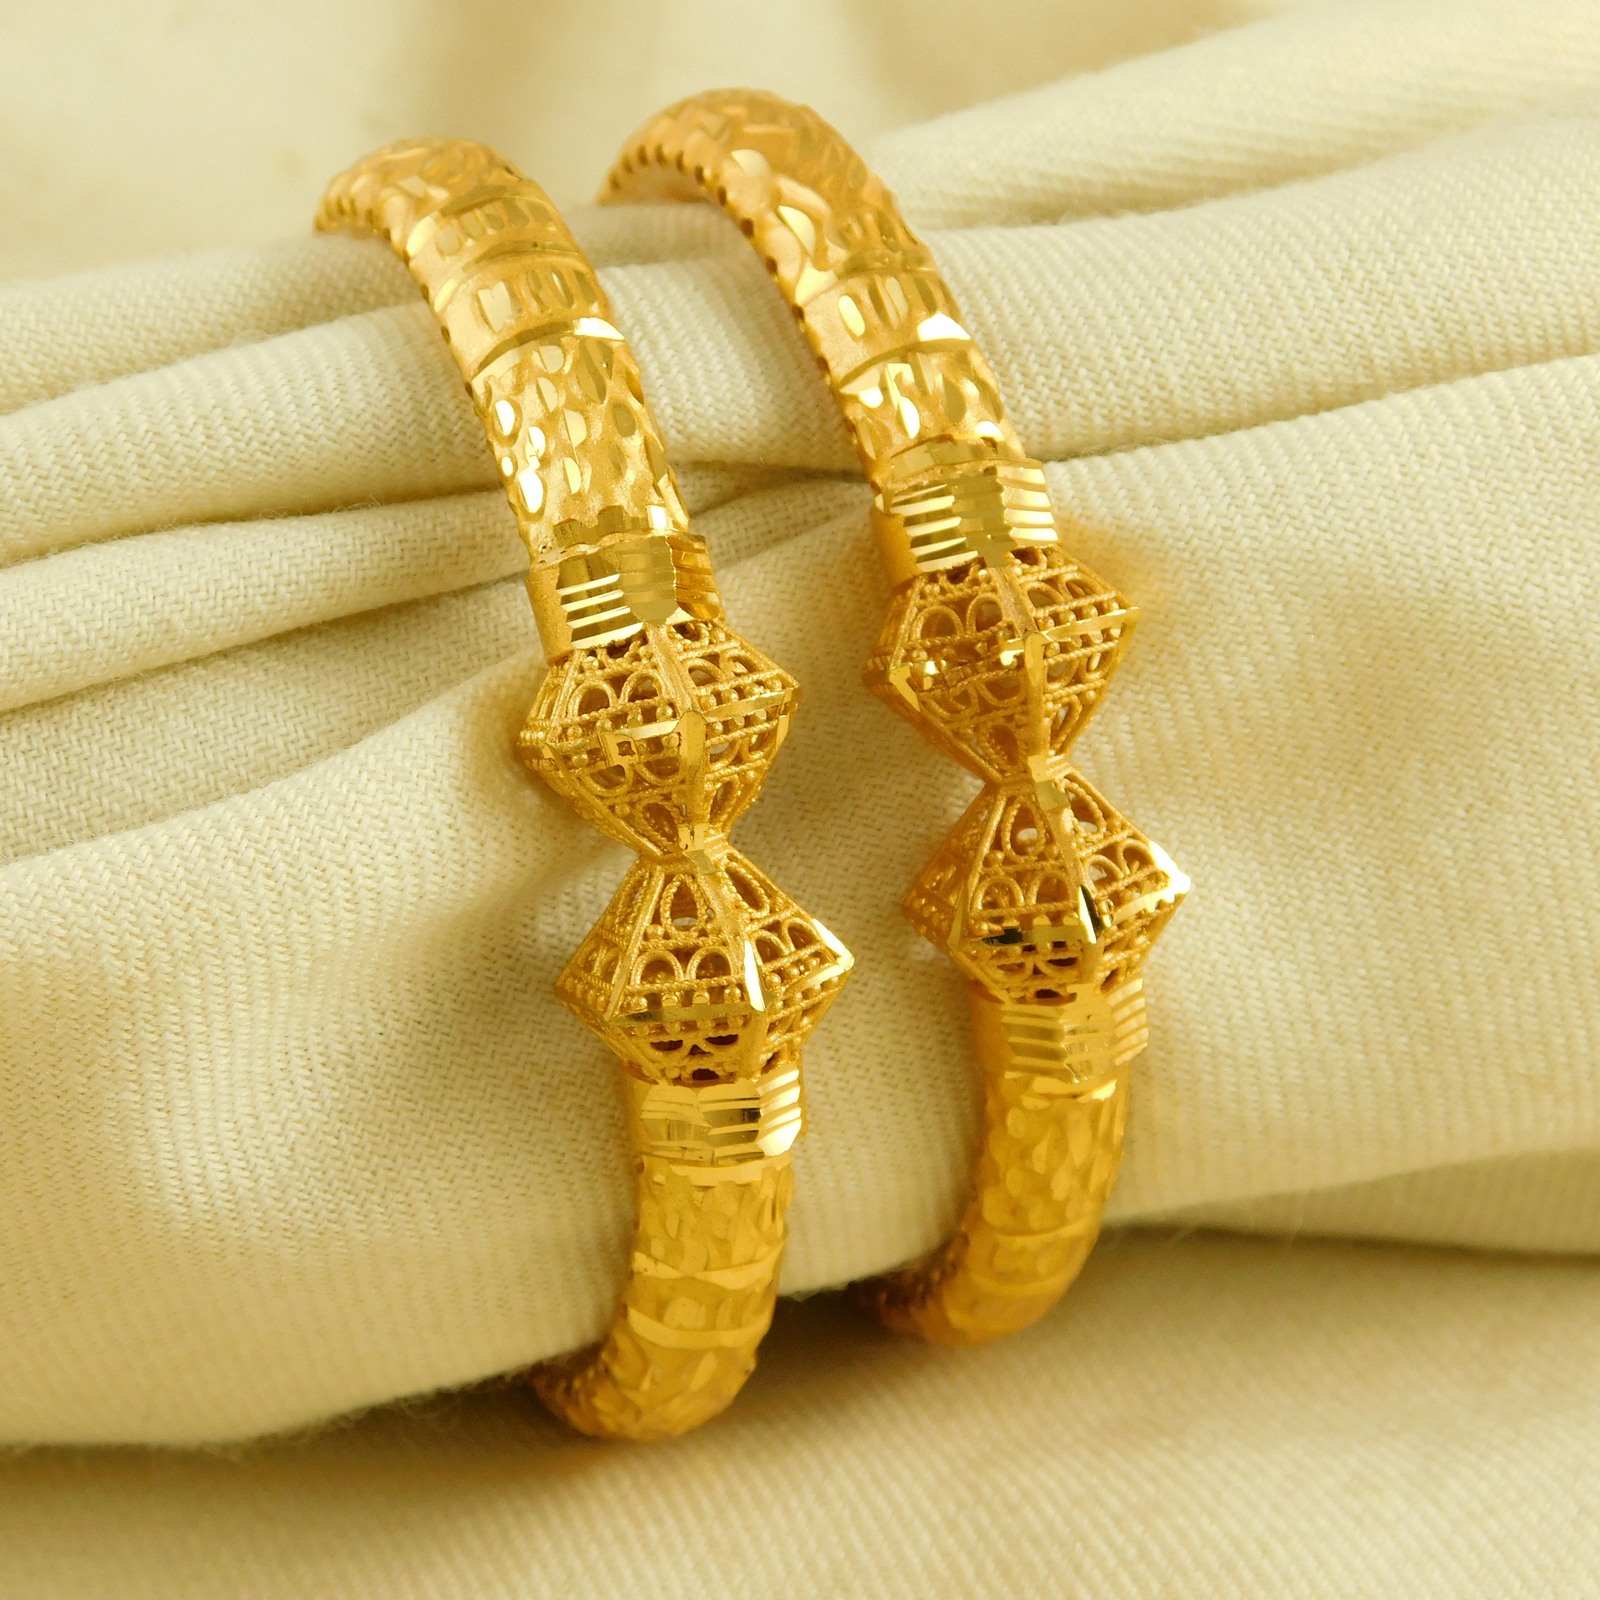 Buy South Indian Imitation Jewellery 12 Pieces Thin Bangles Set for Wedding